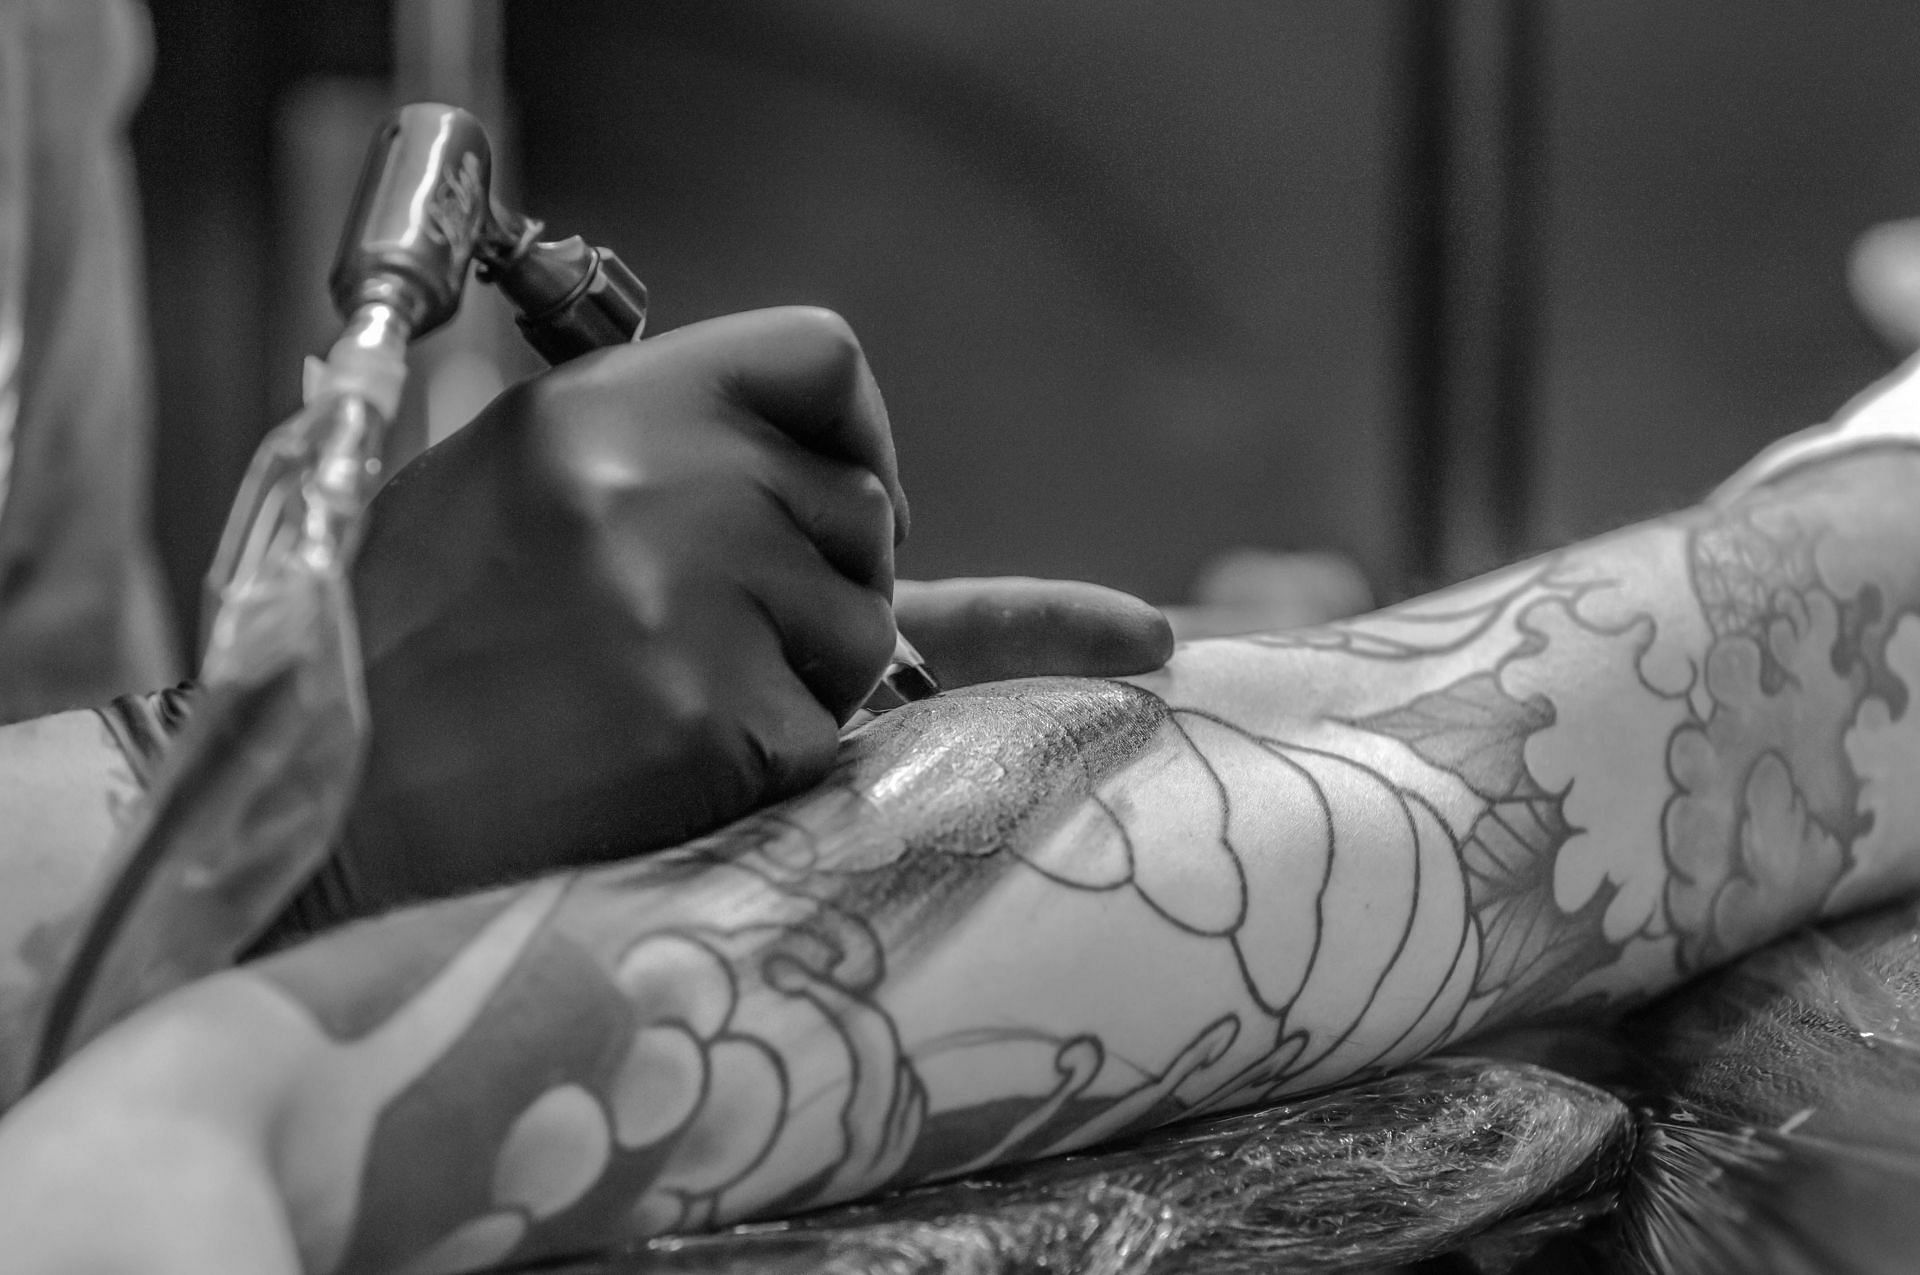 Tattoo Aftercare: What You Need To Know To Avoid Badly Healed And Infected  Tattooshttps://www.alienstattoo.com/post/tattoo-aftercare -what-you-need-to-know-to-avoid-badly-healed-and-infected-tattoos